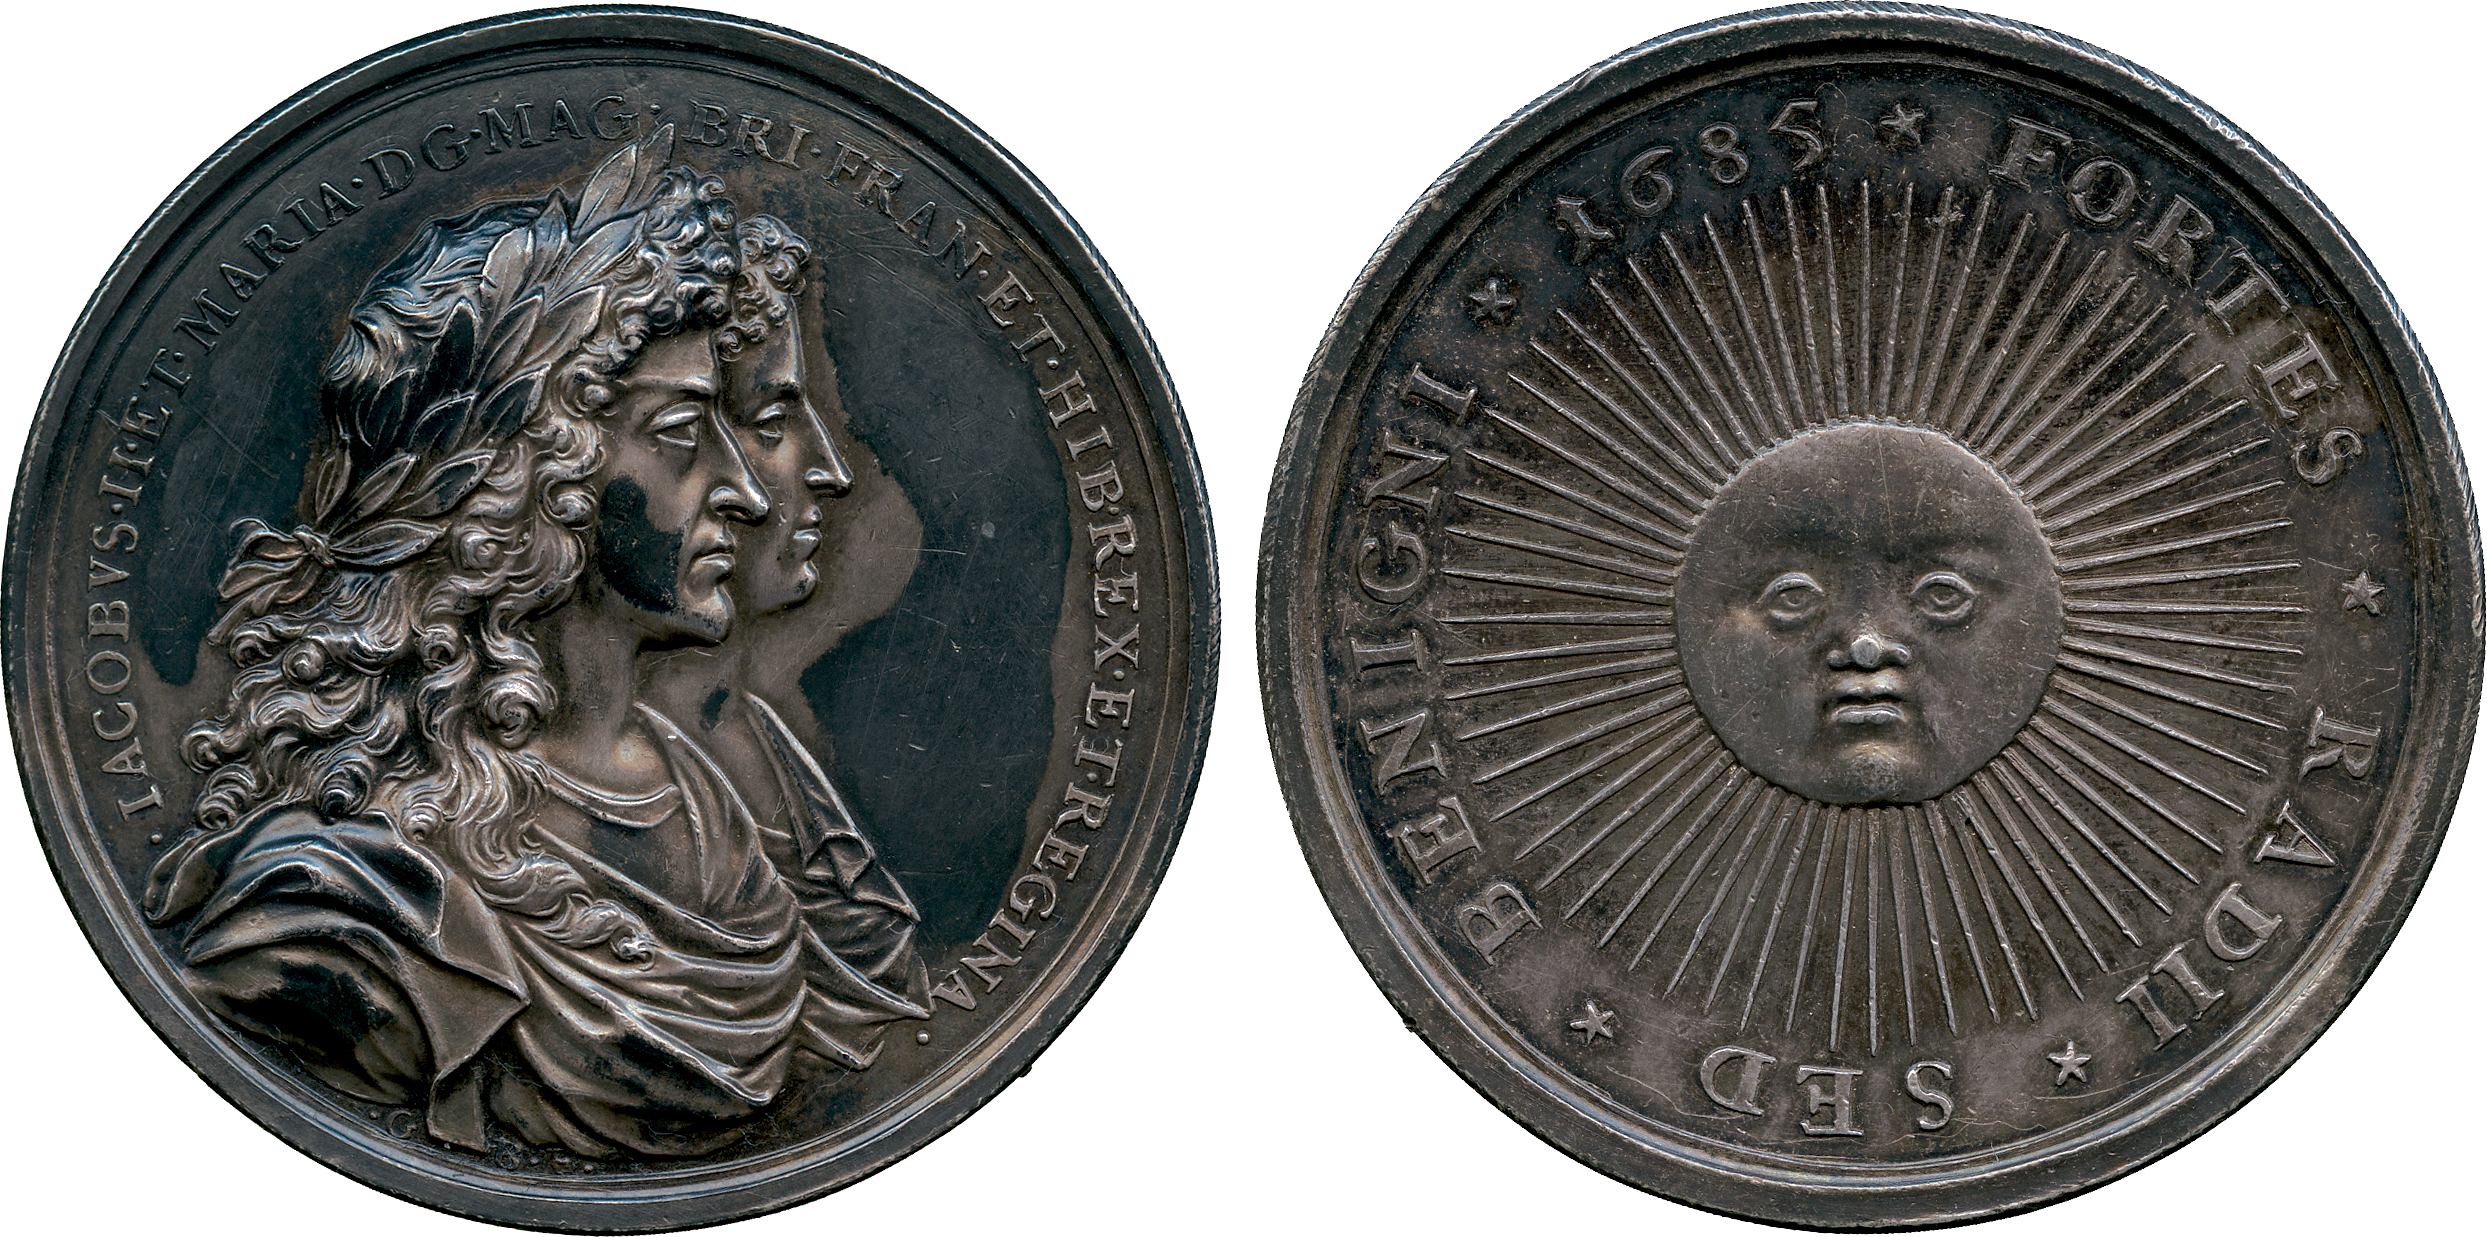 COMMEMORATIVE MEDALS, BRITISH MEDALS, James II (1685-1688), James II and Mary of Modena,